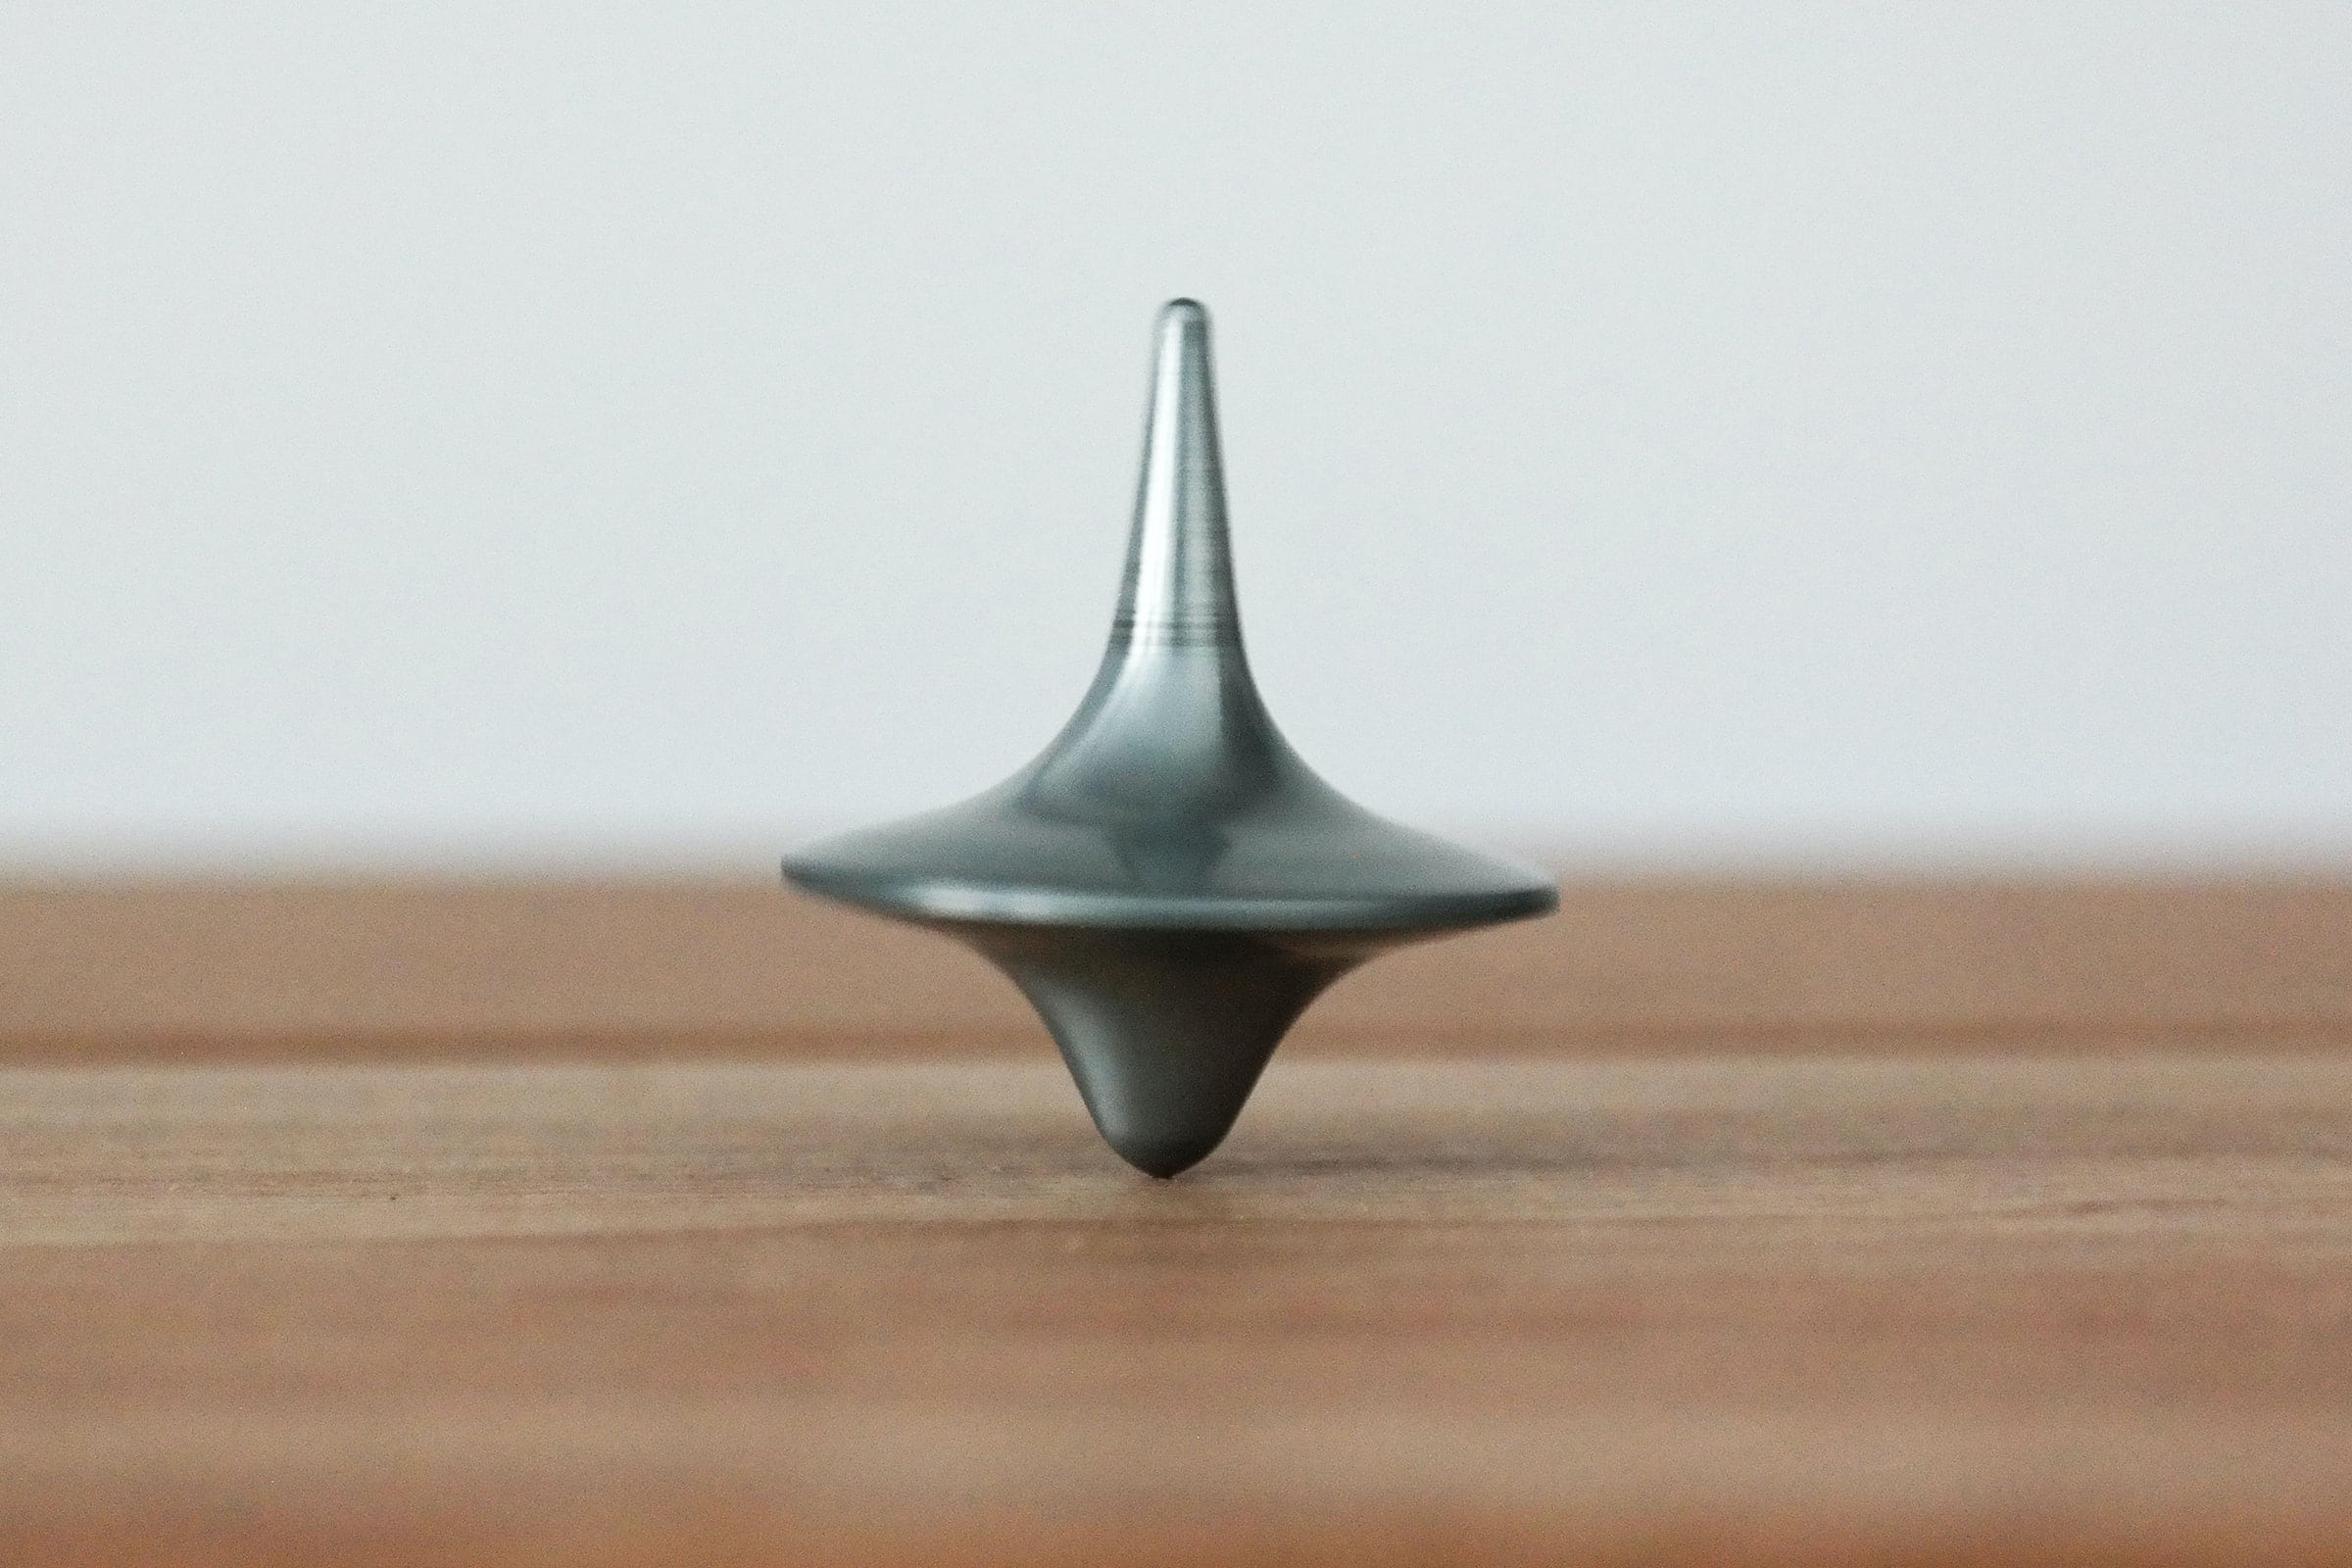 Image of a spinning top on a wooden surface